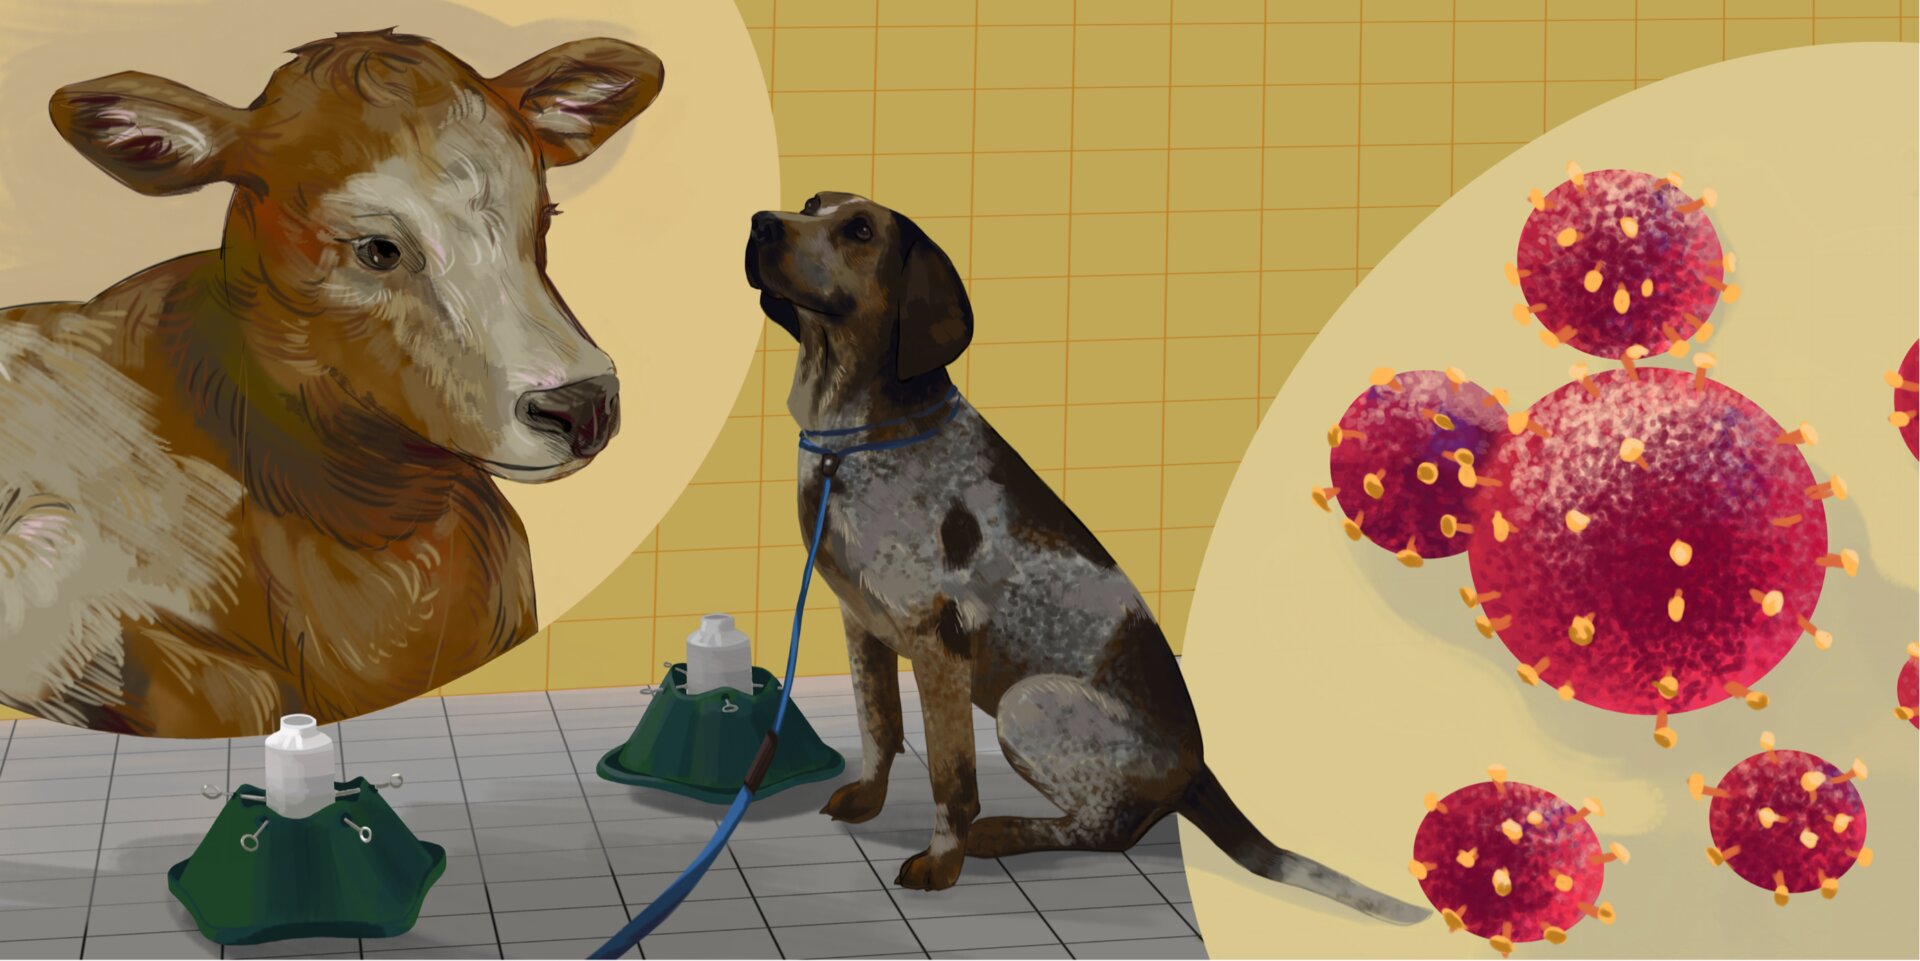 Can dogs sniff out bovine respiratory disease?